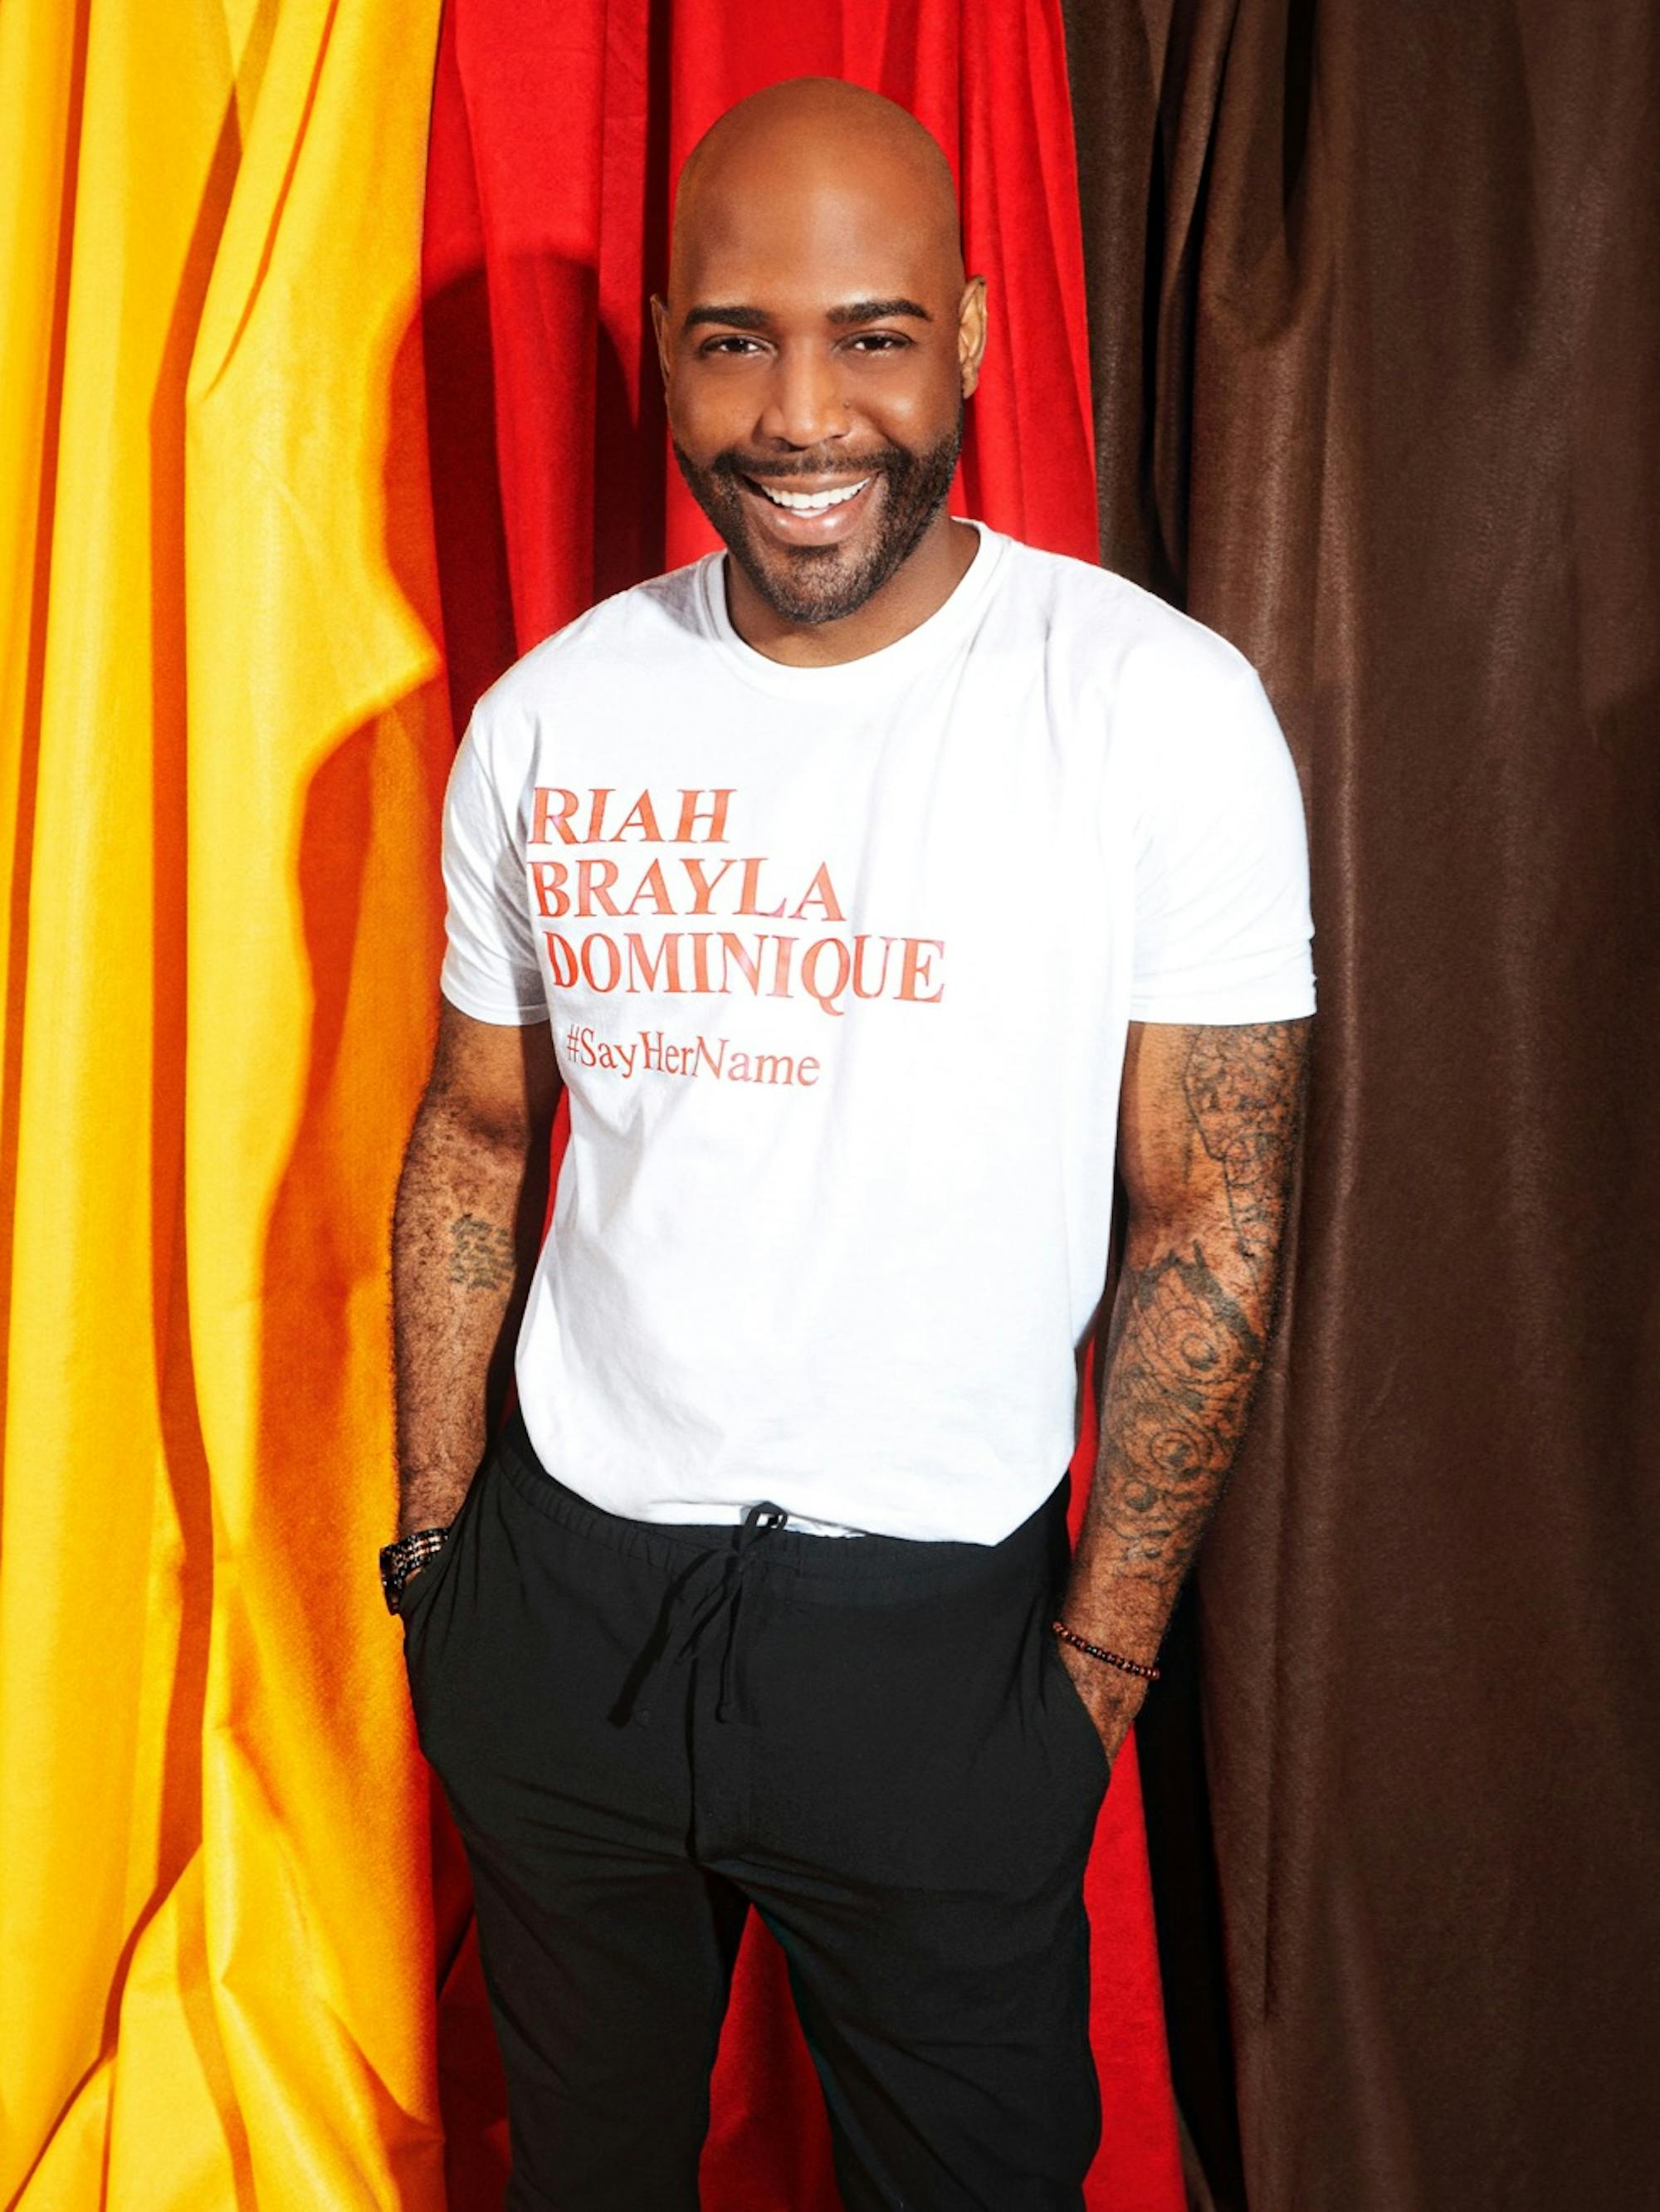 Karamo Brown wears a white t-shirt and black pants. His shirt reads: Riah Brayla Dominique #SayHerName. Behind him are yellow, red, and black hanging cloths.